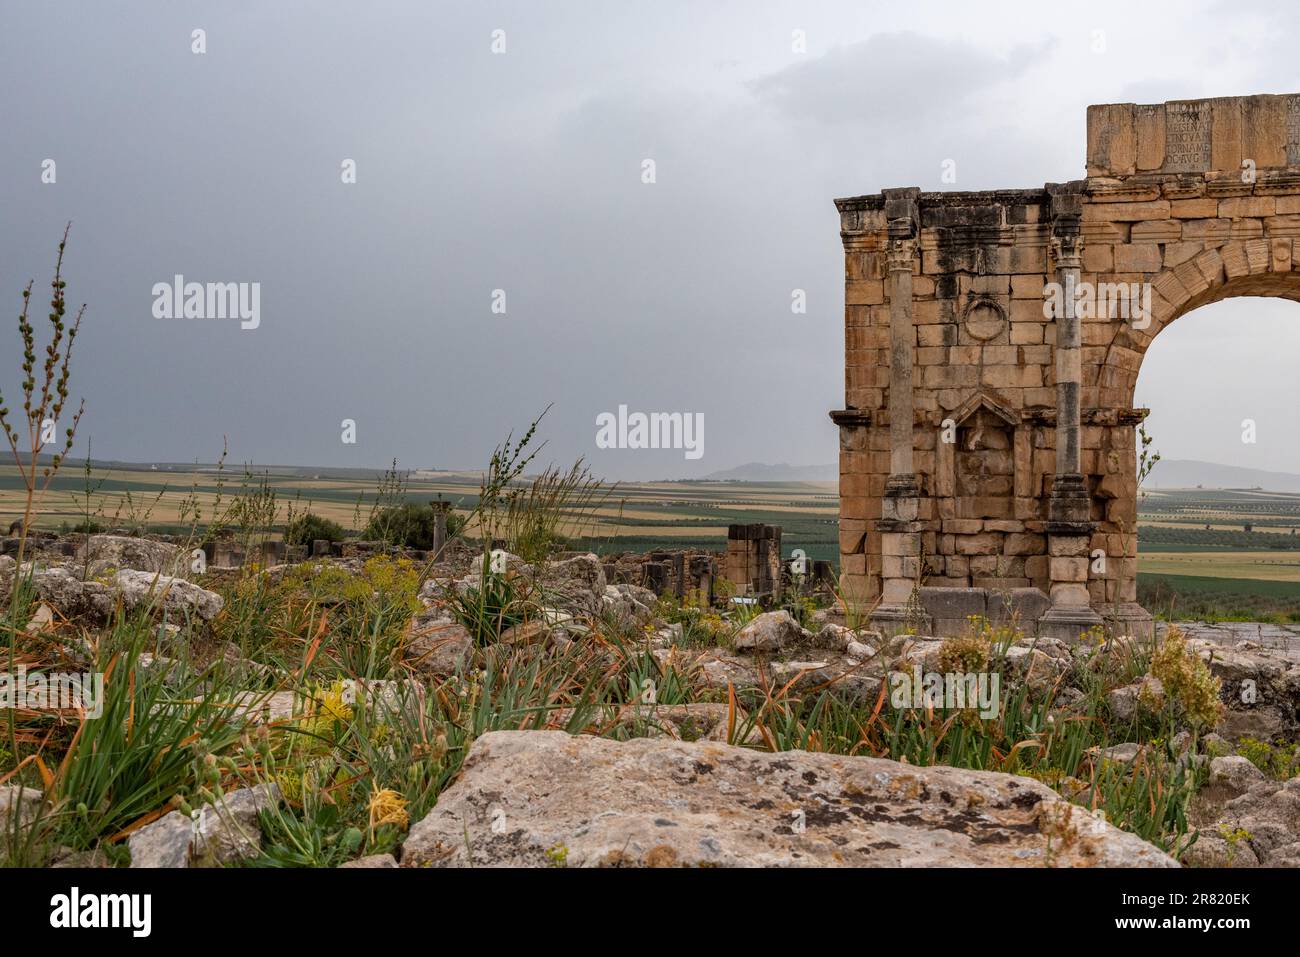 Iconic Triumphal Arch of Volubilis, an old ancient Roman city in Morocco, North Africa Stock Photo